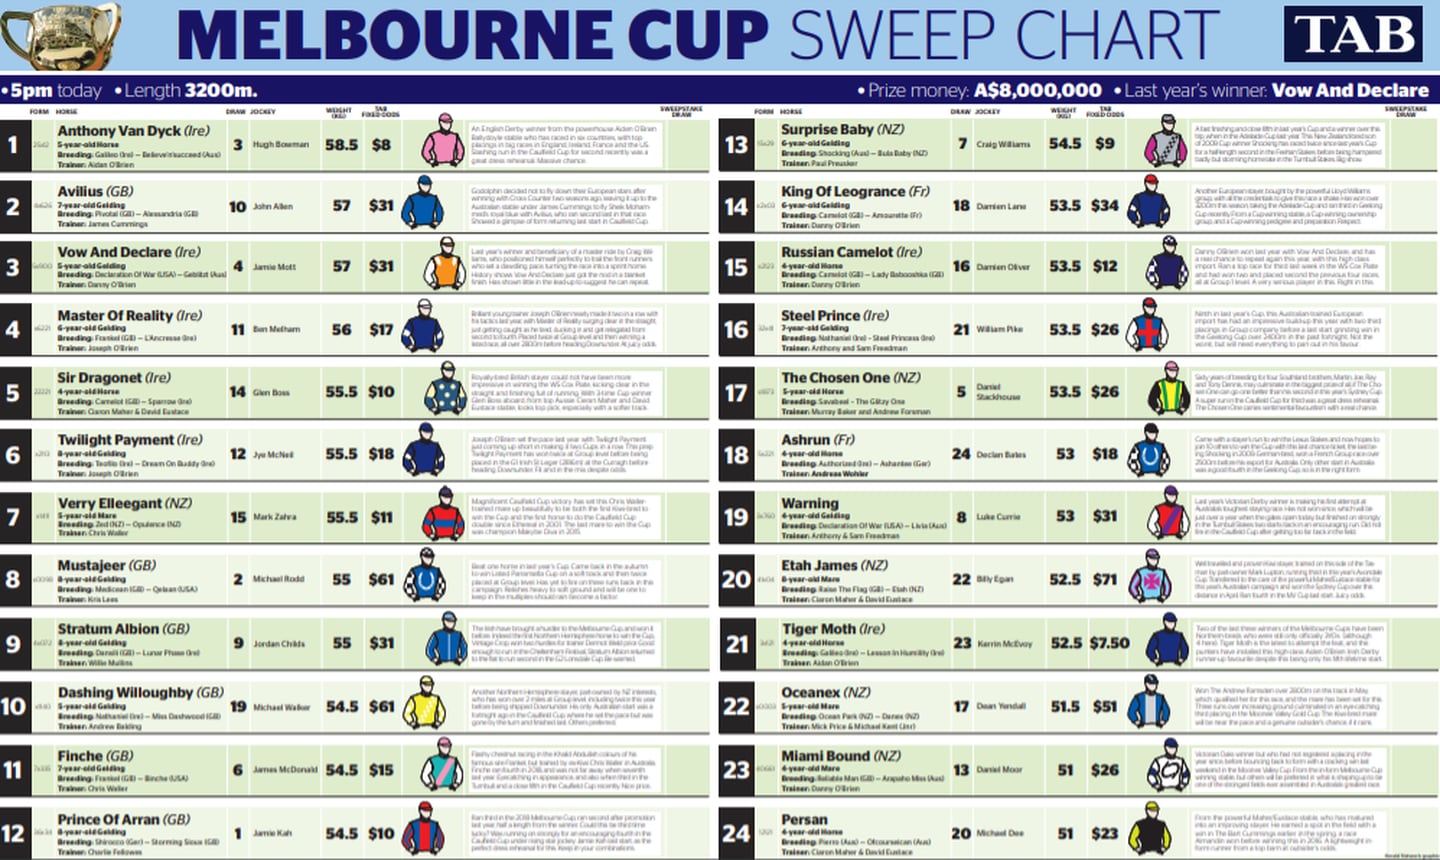 2020 Melbourne Cup at Flemington Your office sweepstake starter kit